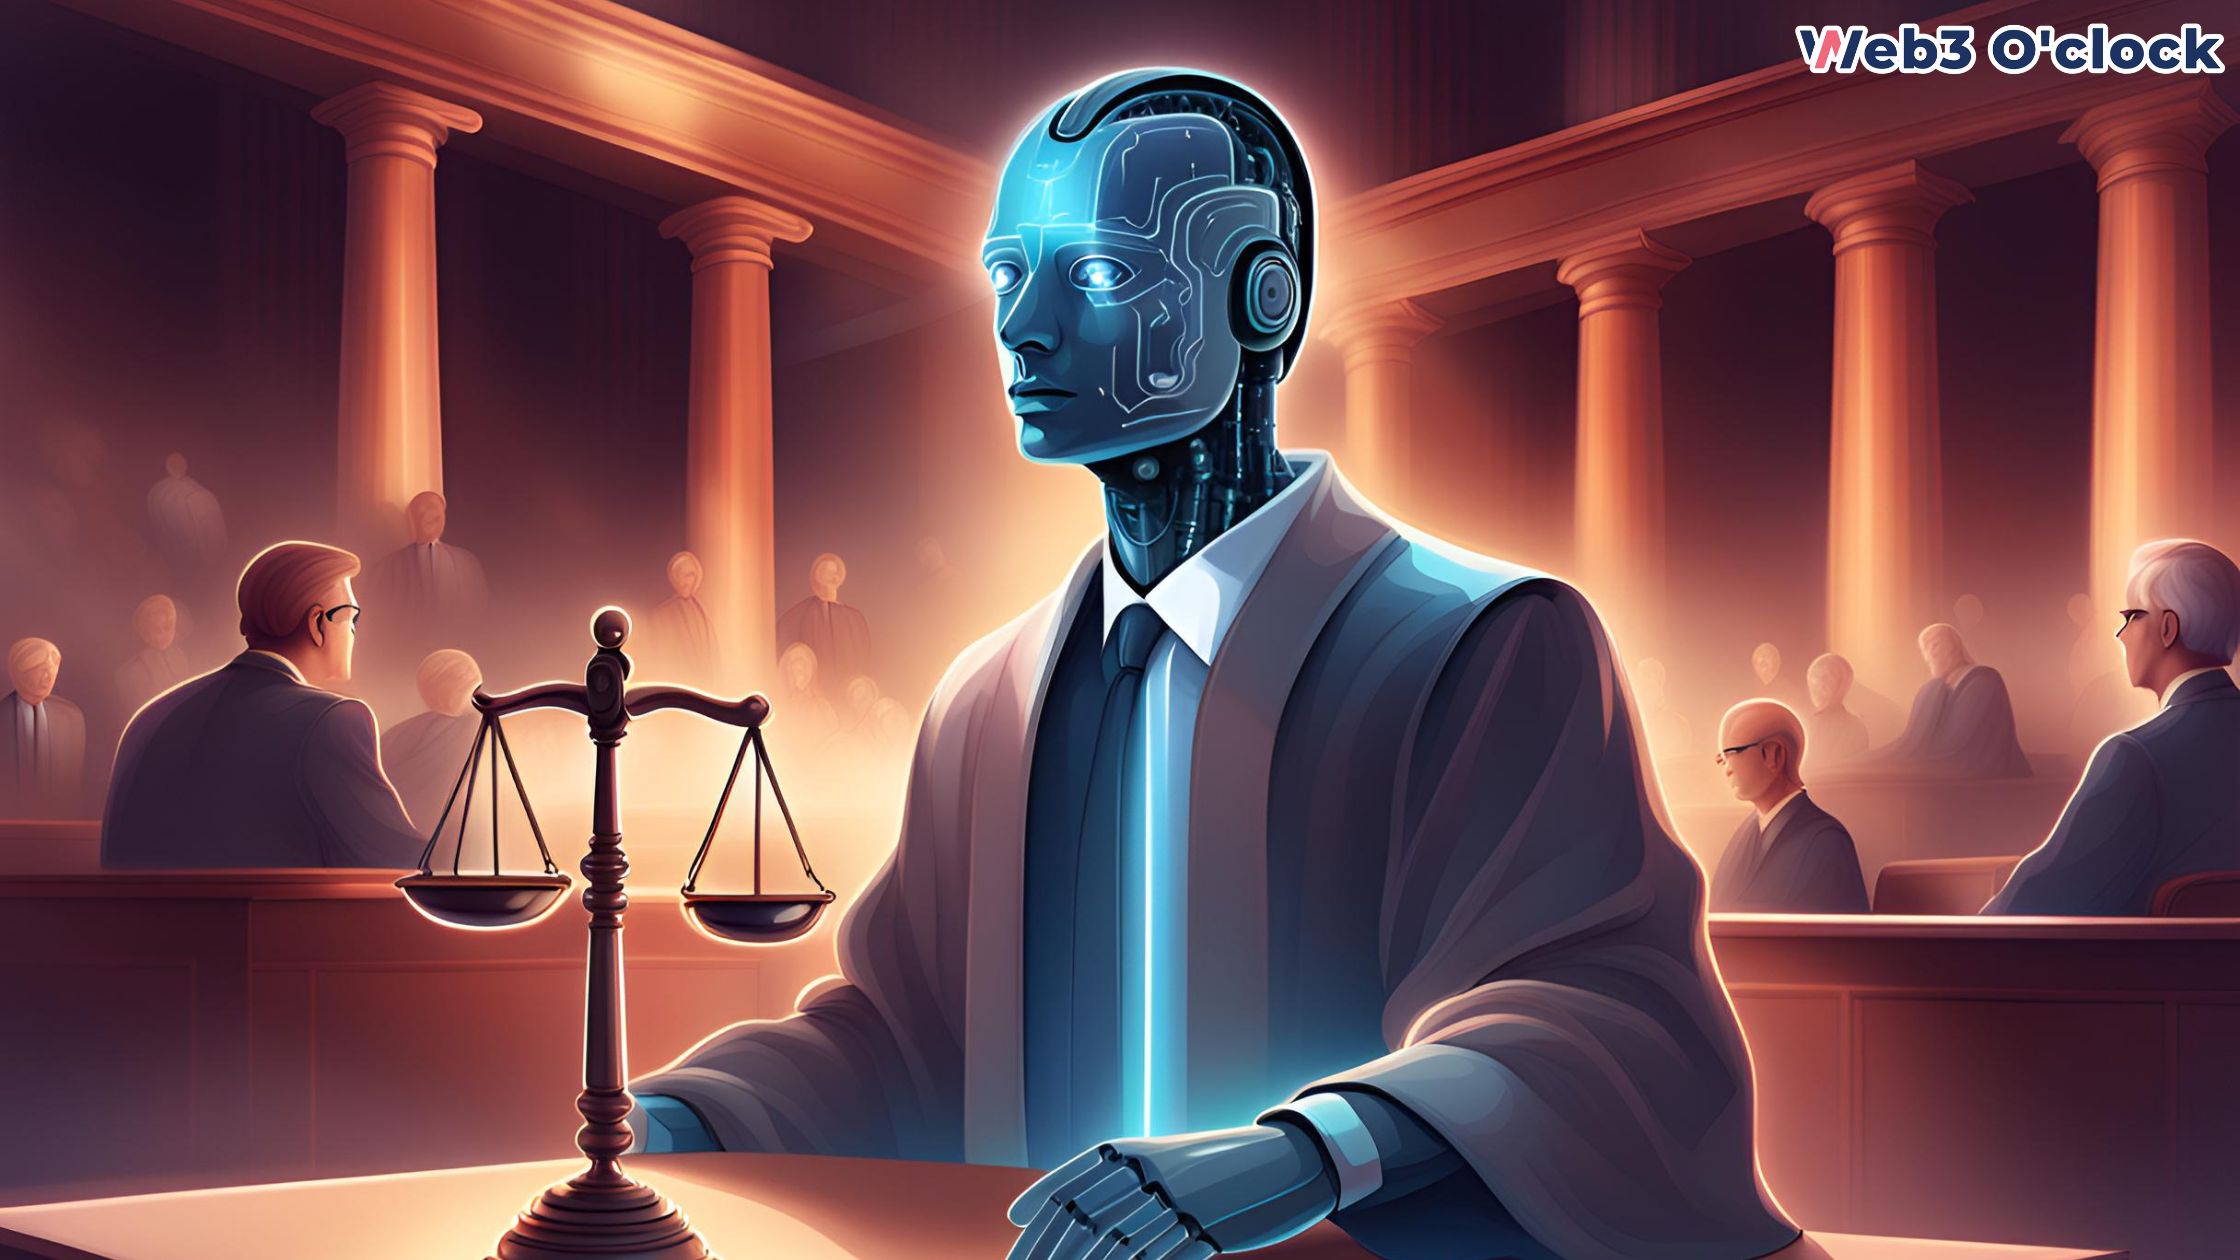 Morocco Embraces AI in Courts by web3 o'clock